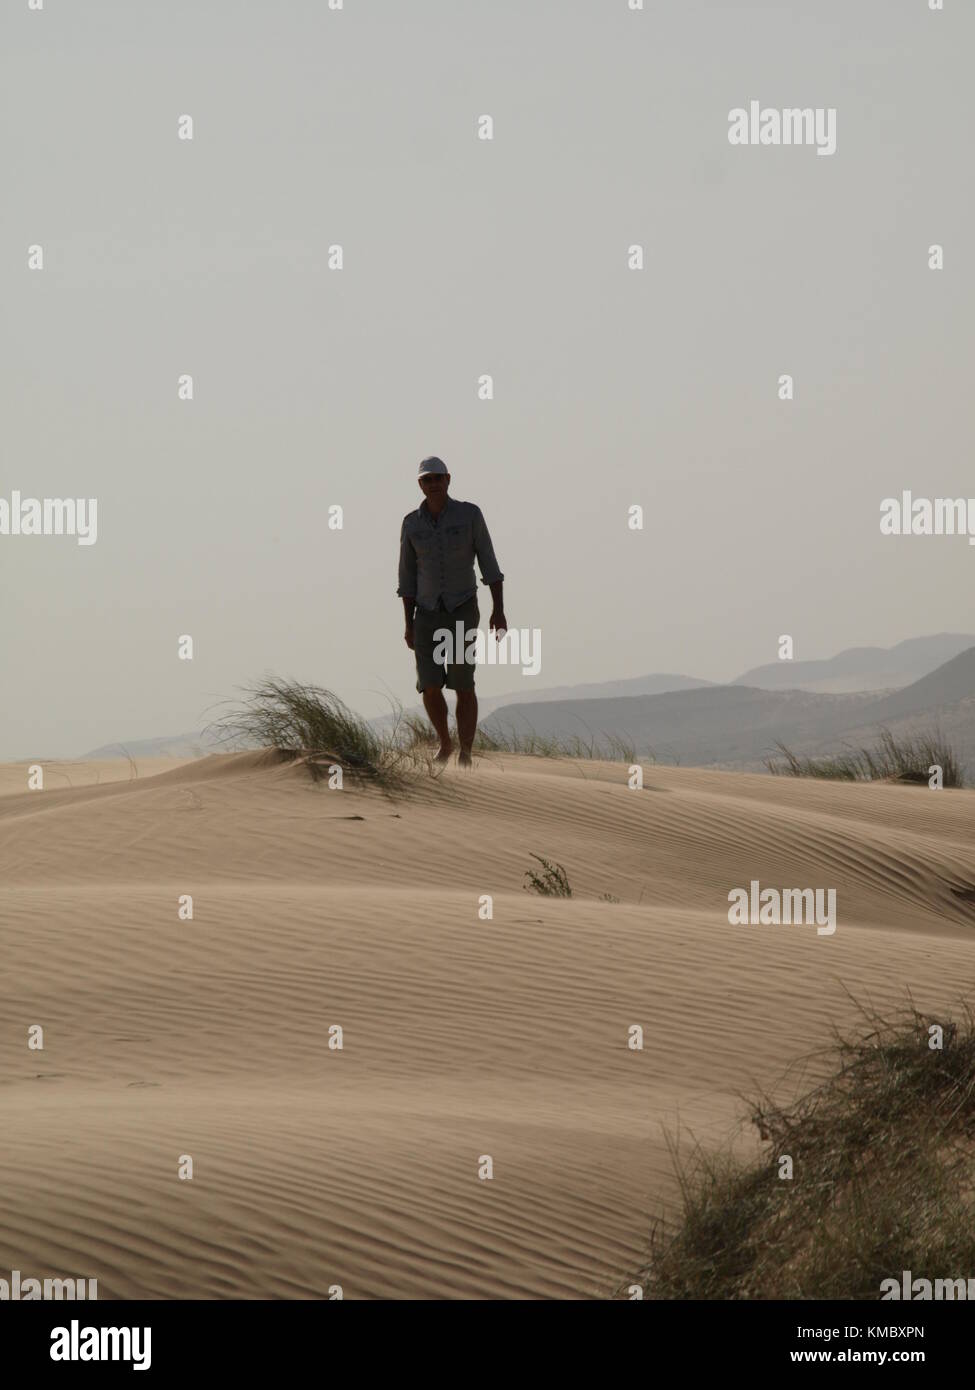 a man walking in the desert on a sand dune Stock Photo